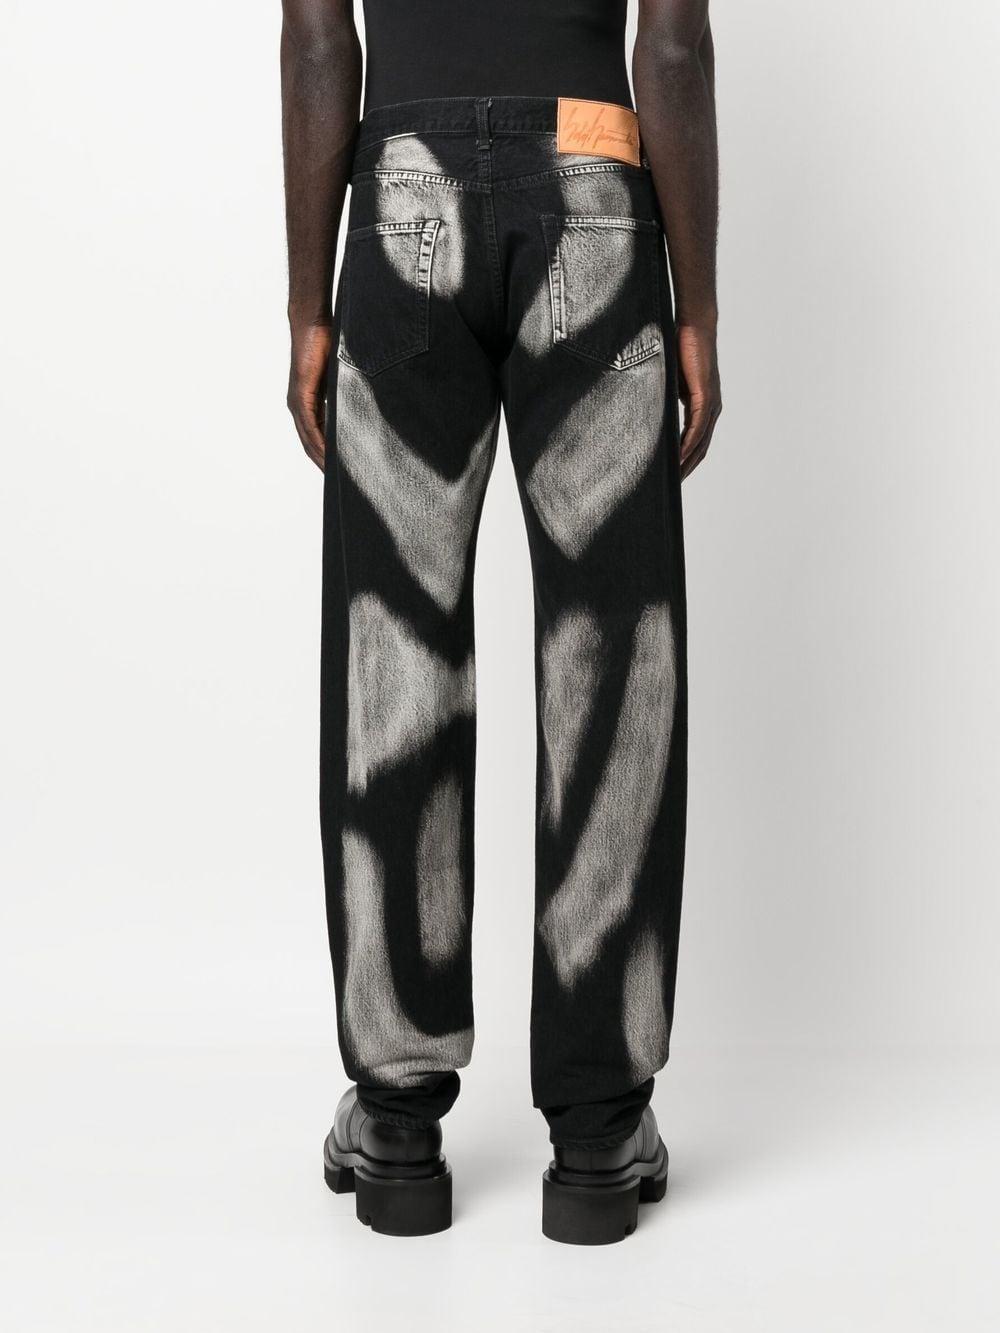 Yohji Yamamoto Abstract Print Jeans in Black for Men | Lyst